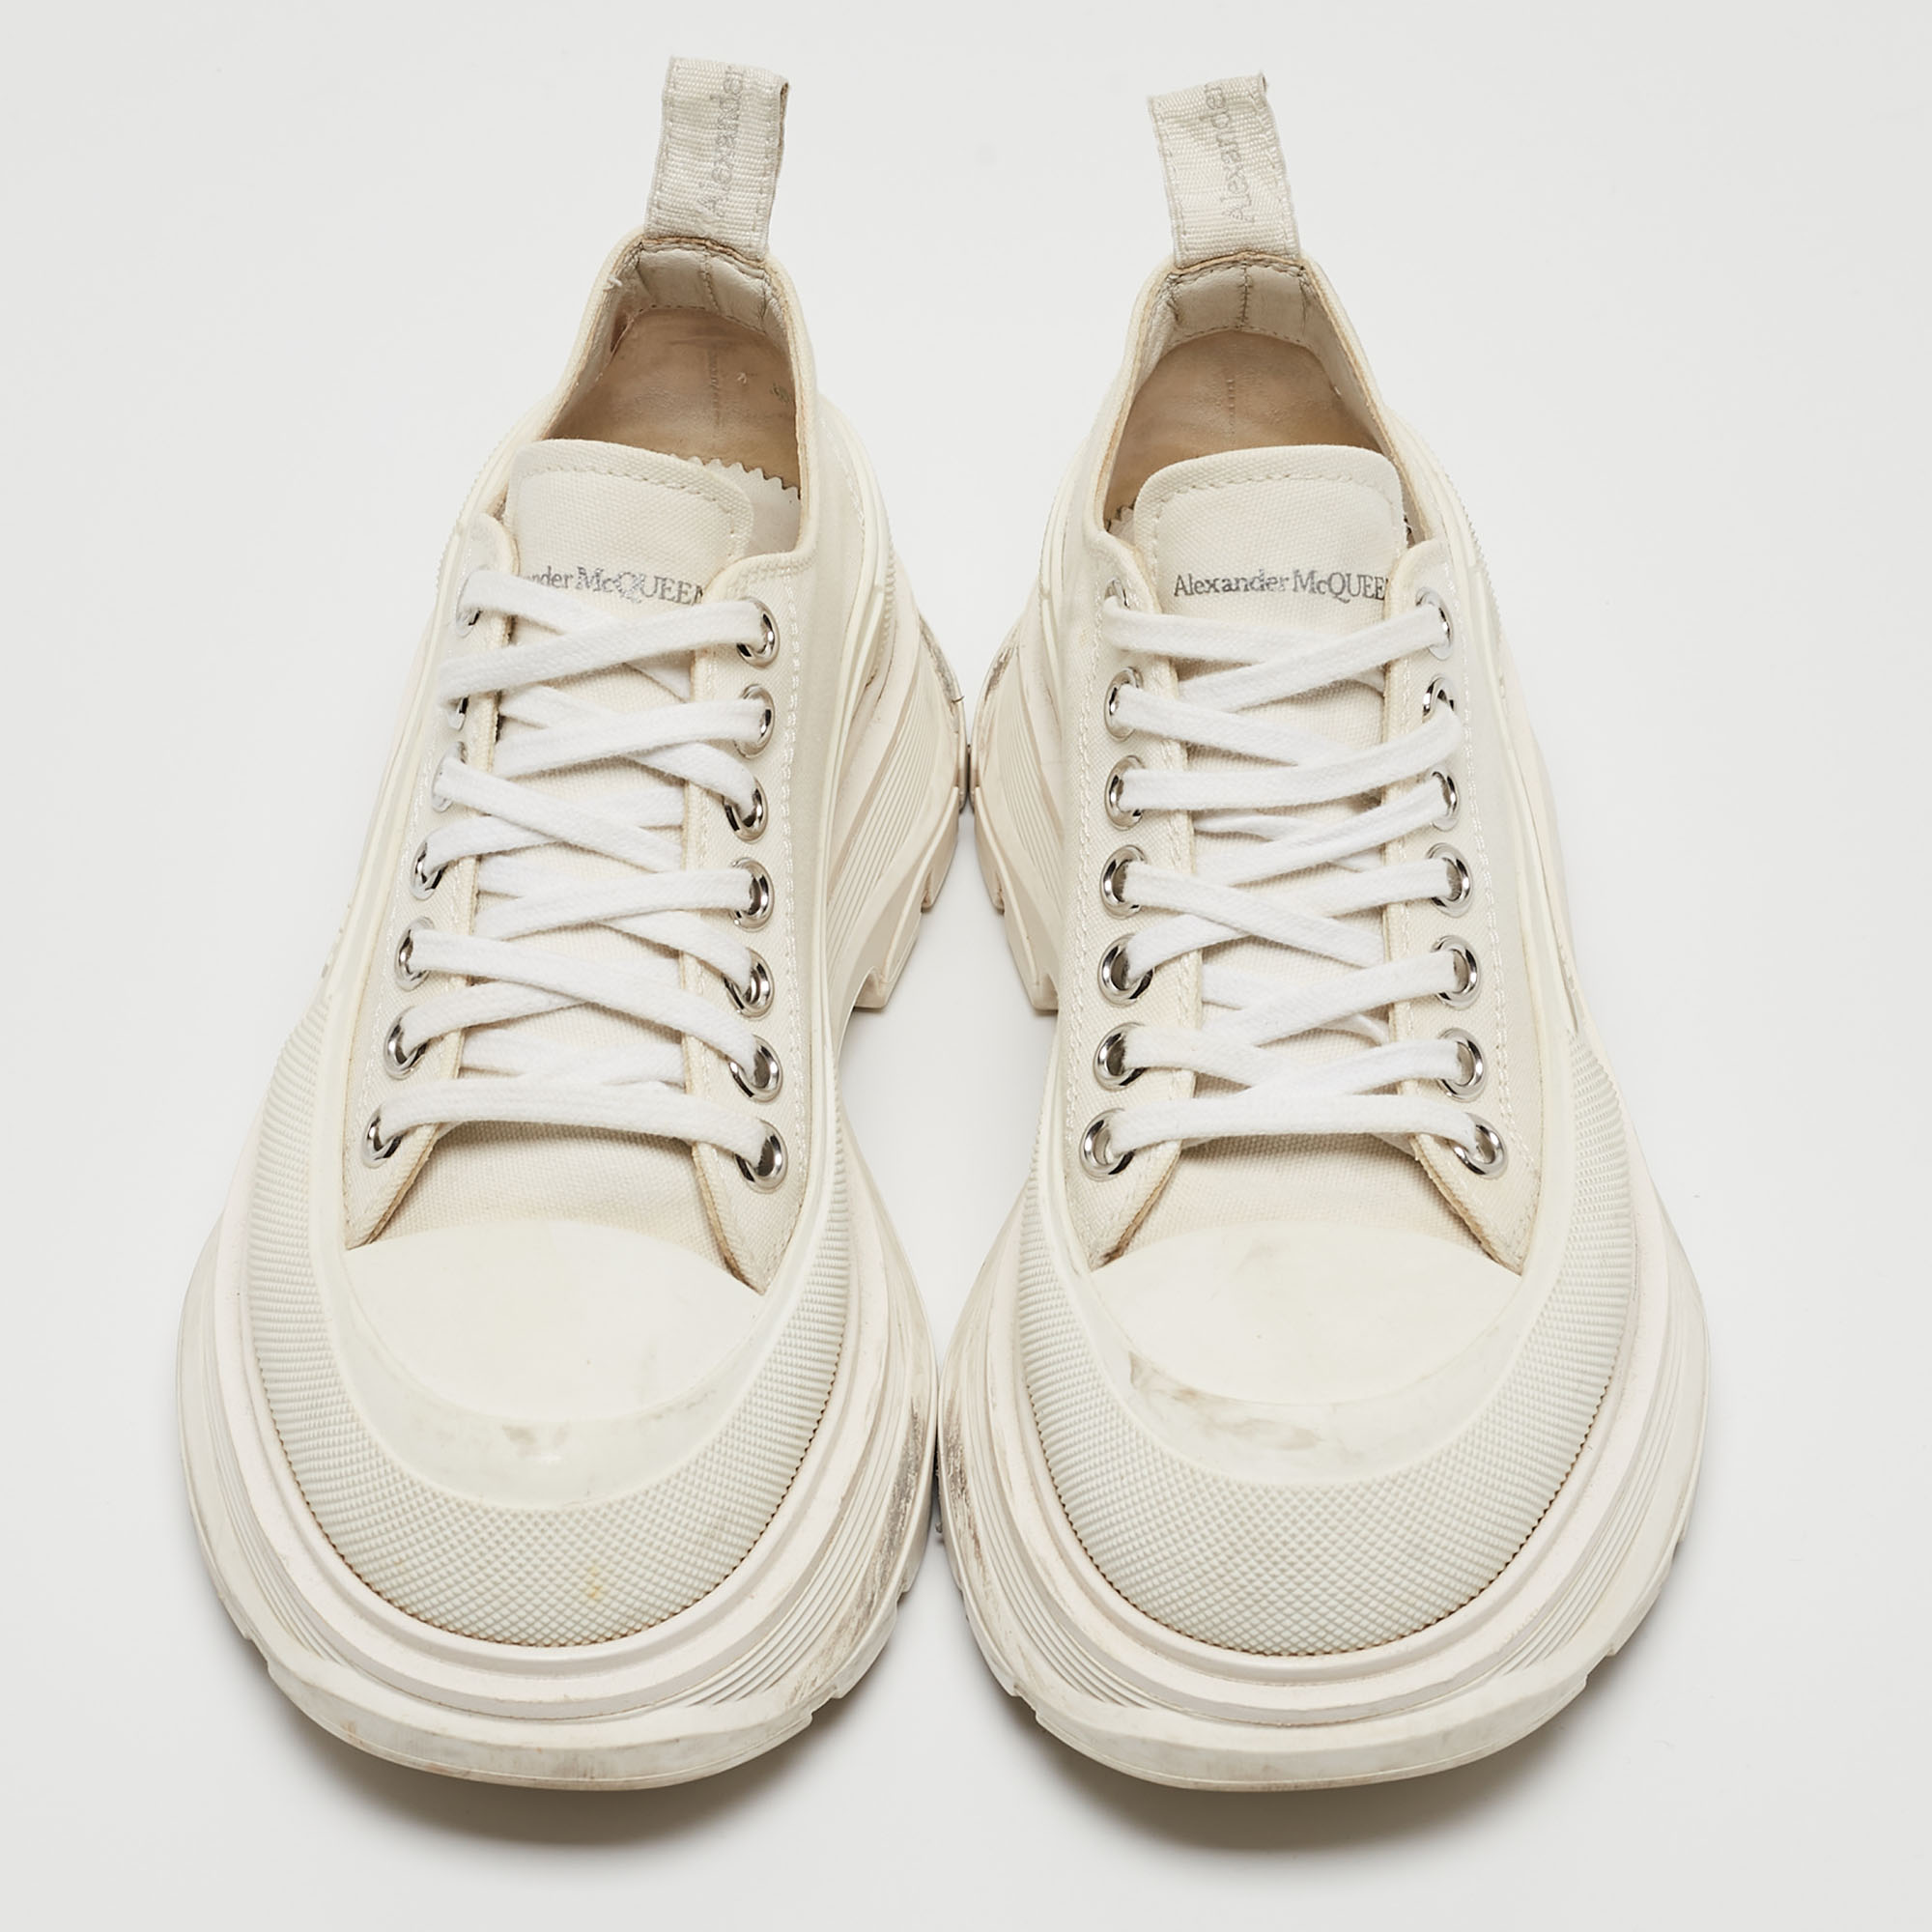 Alexander Mcqueen White Canvas And Rubber Tread Slick Sneakers Size 38.5